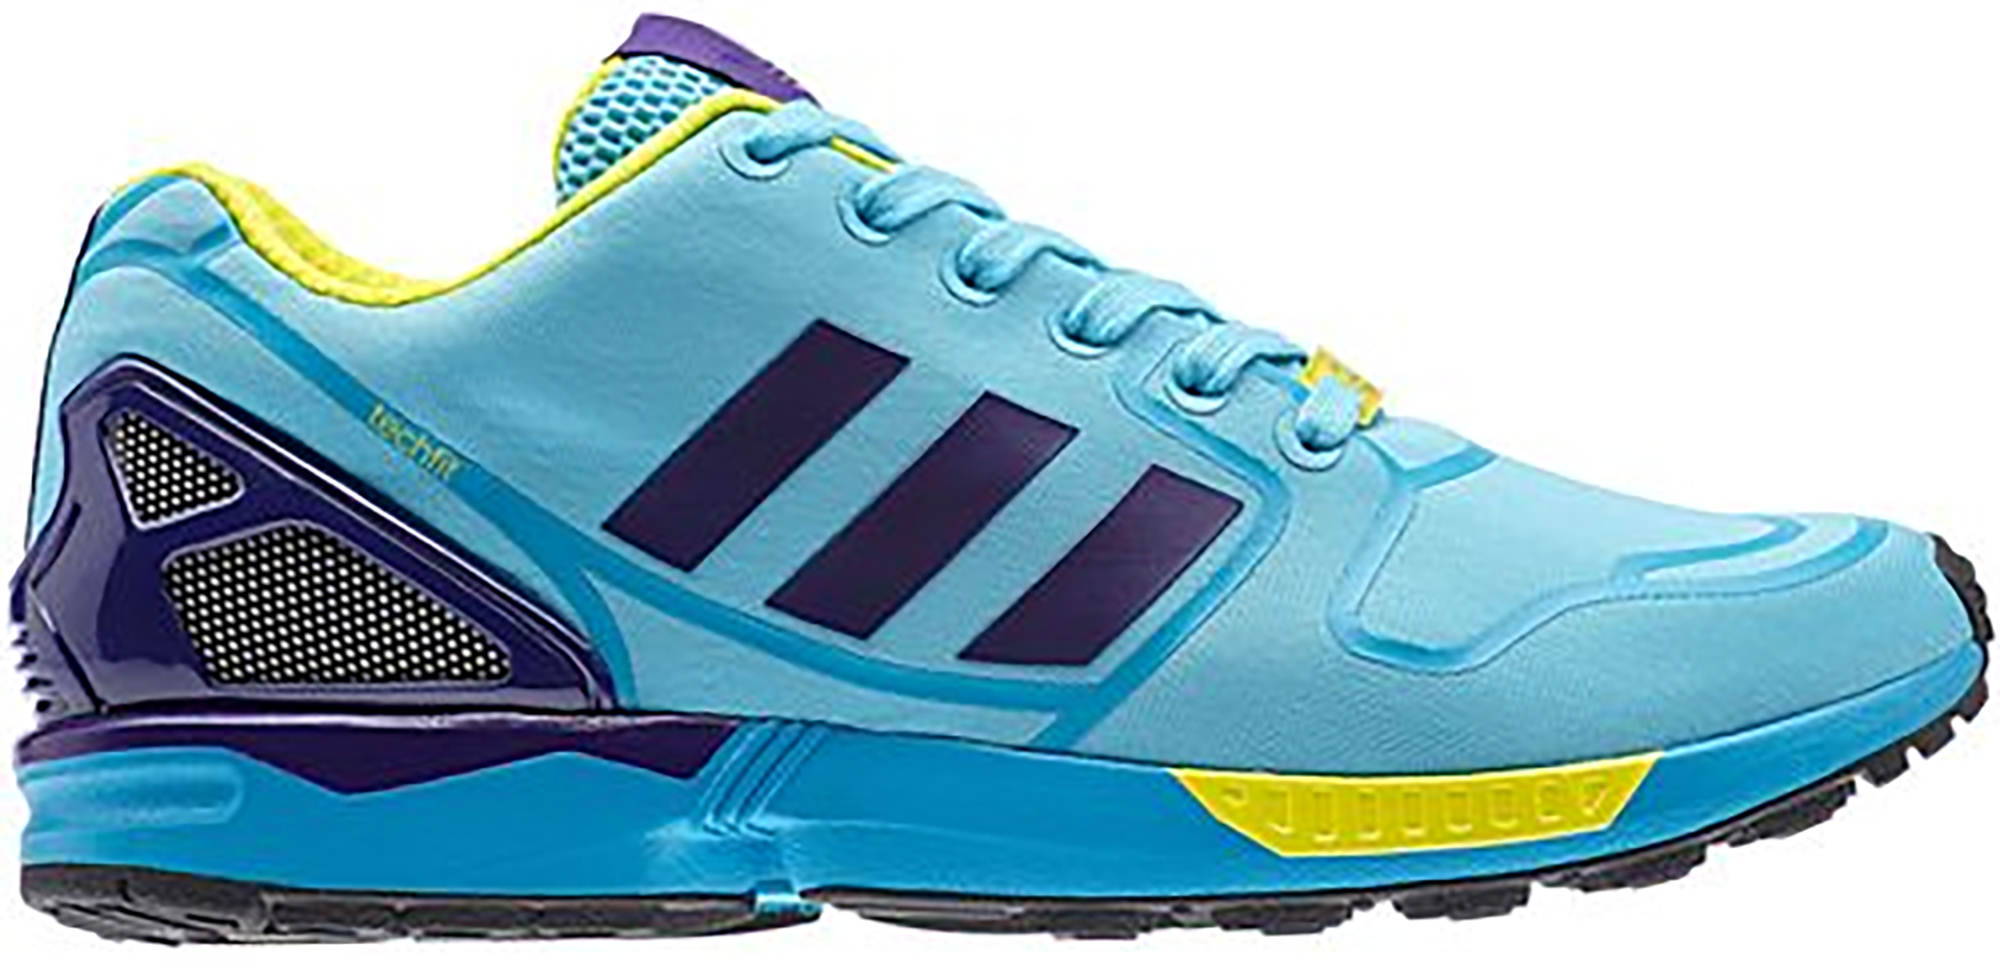 adidas zx flux picture